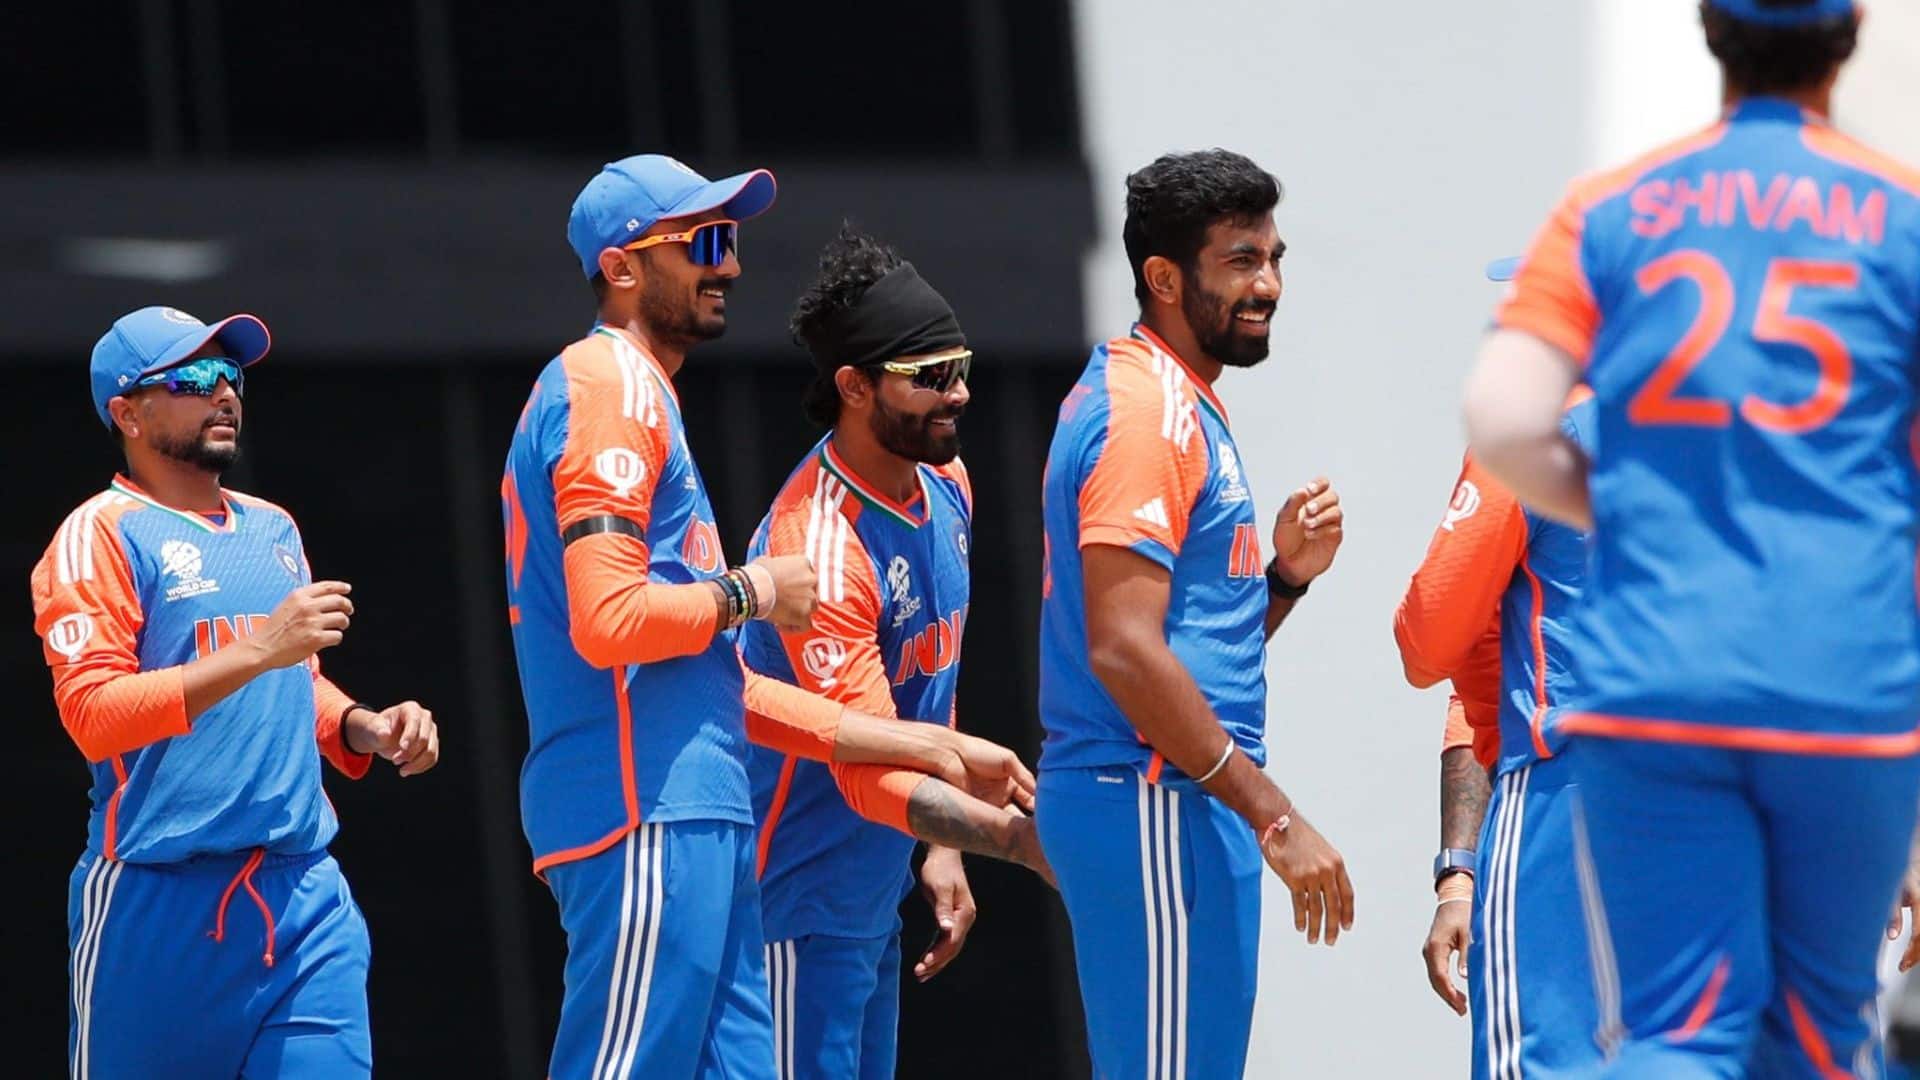 India secured a clinical win vs AFG [X]